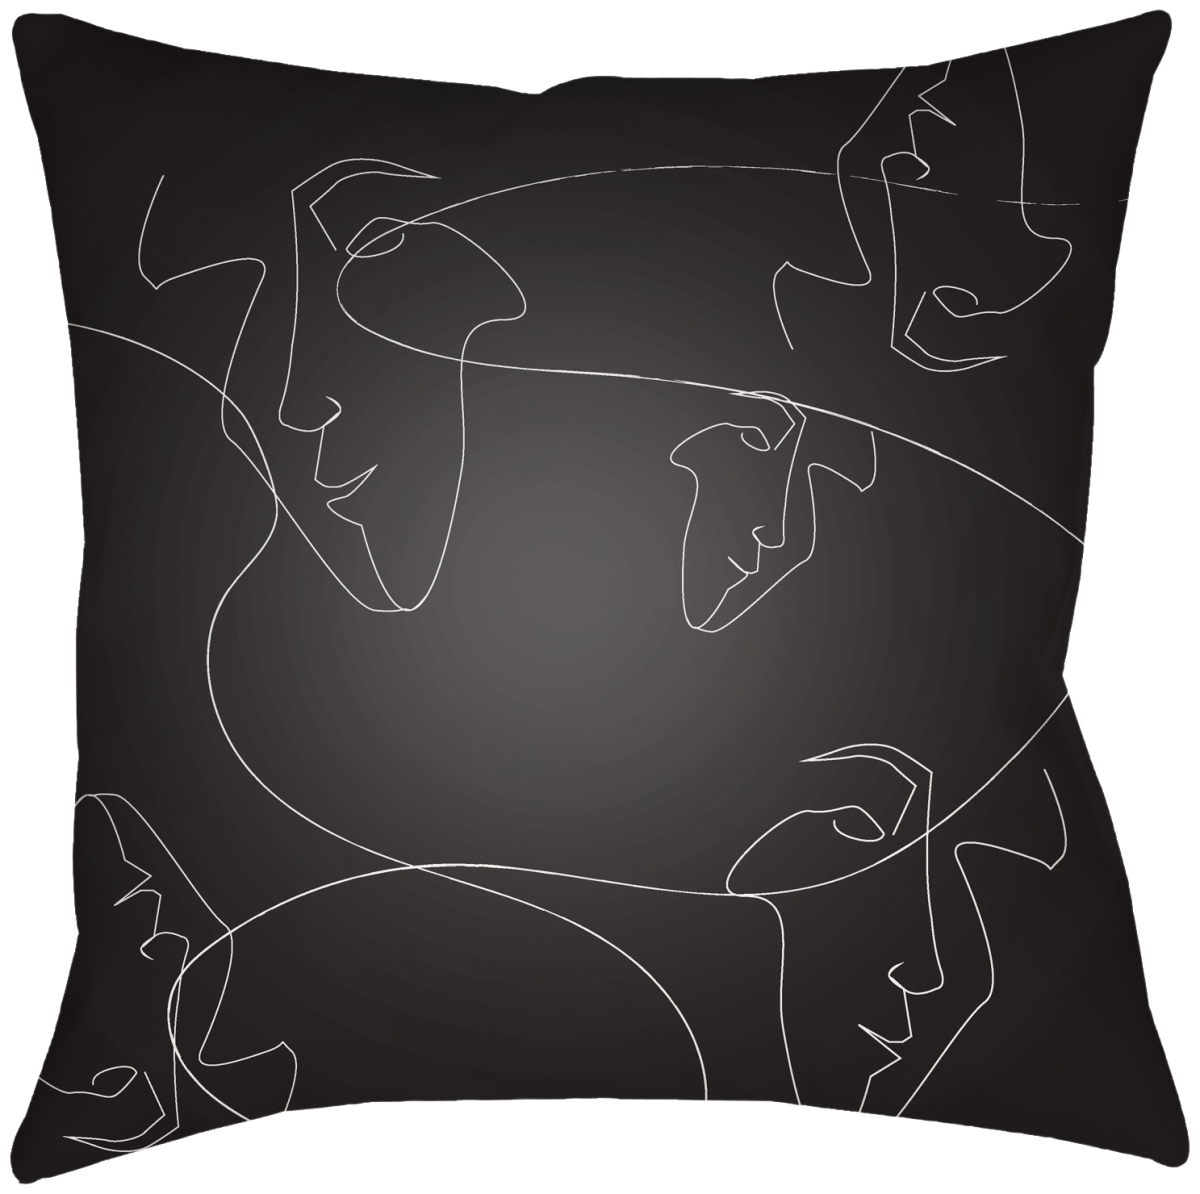 MDF003-1616 16 x 16 in. Modern Faces Accent Square Pillow, Black & White -  Surya